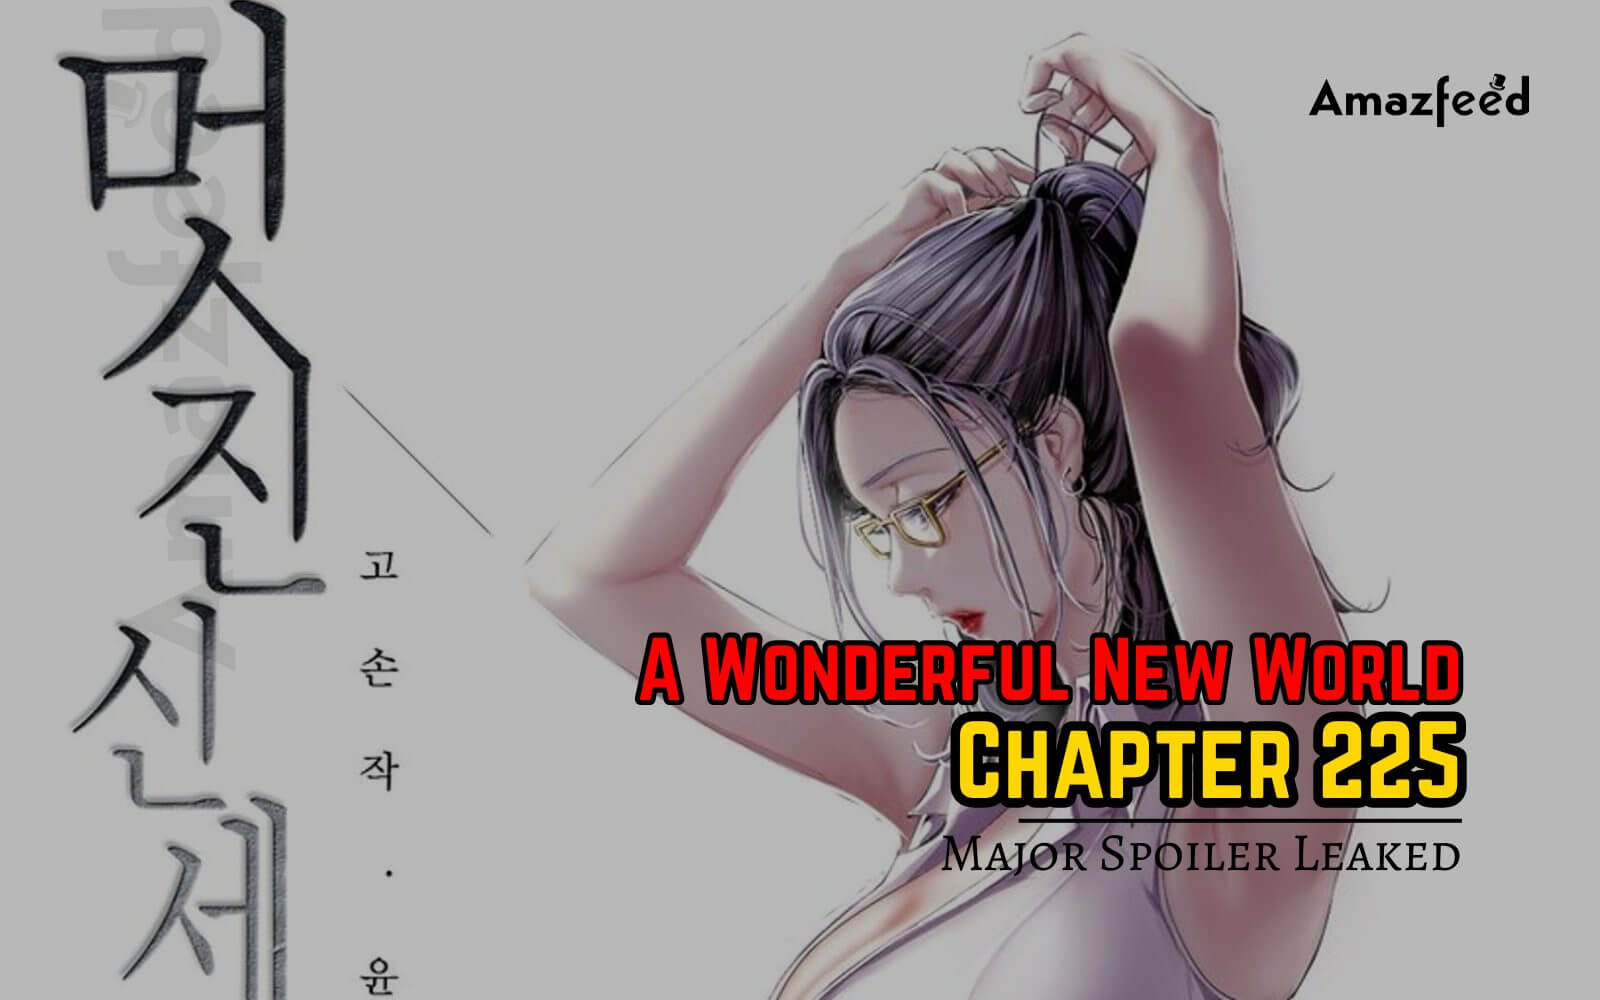 A Wonderful New World Chapter 225 Leaked Spoiler